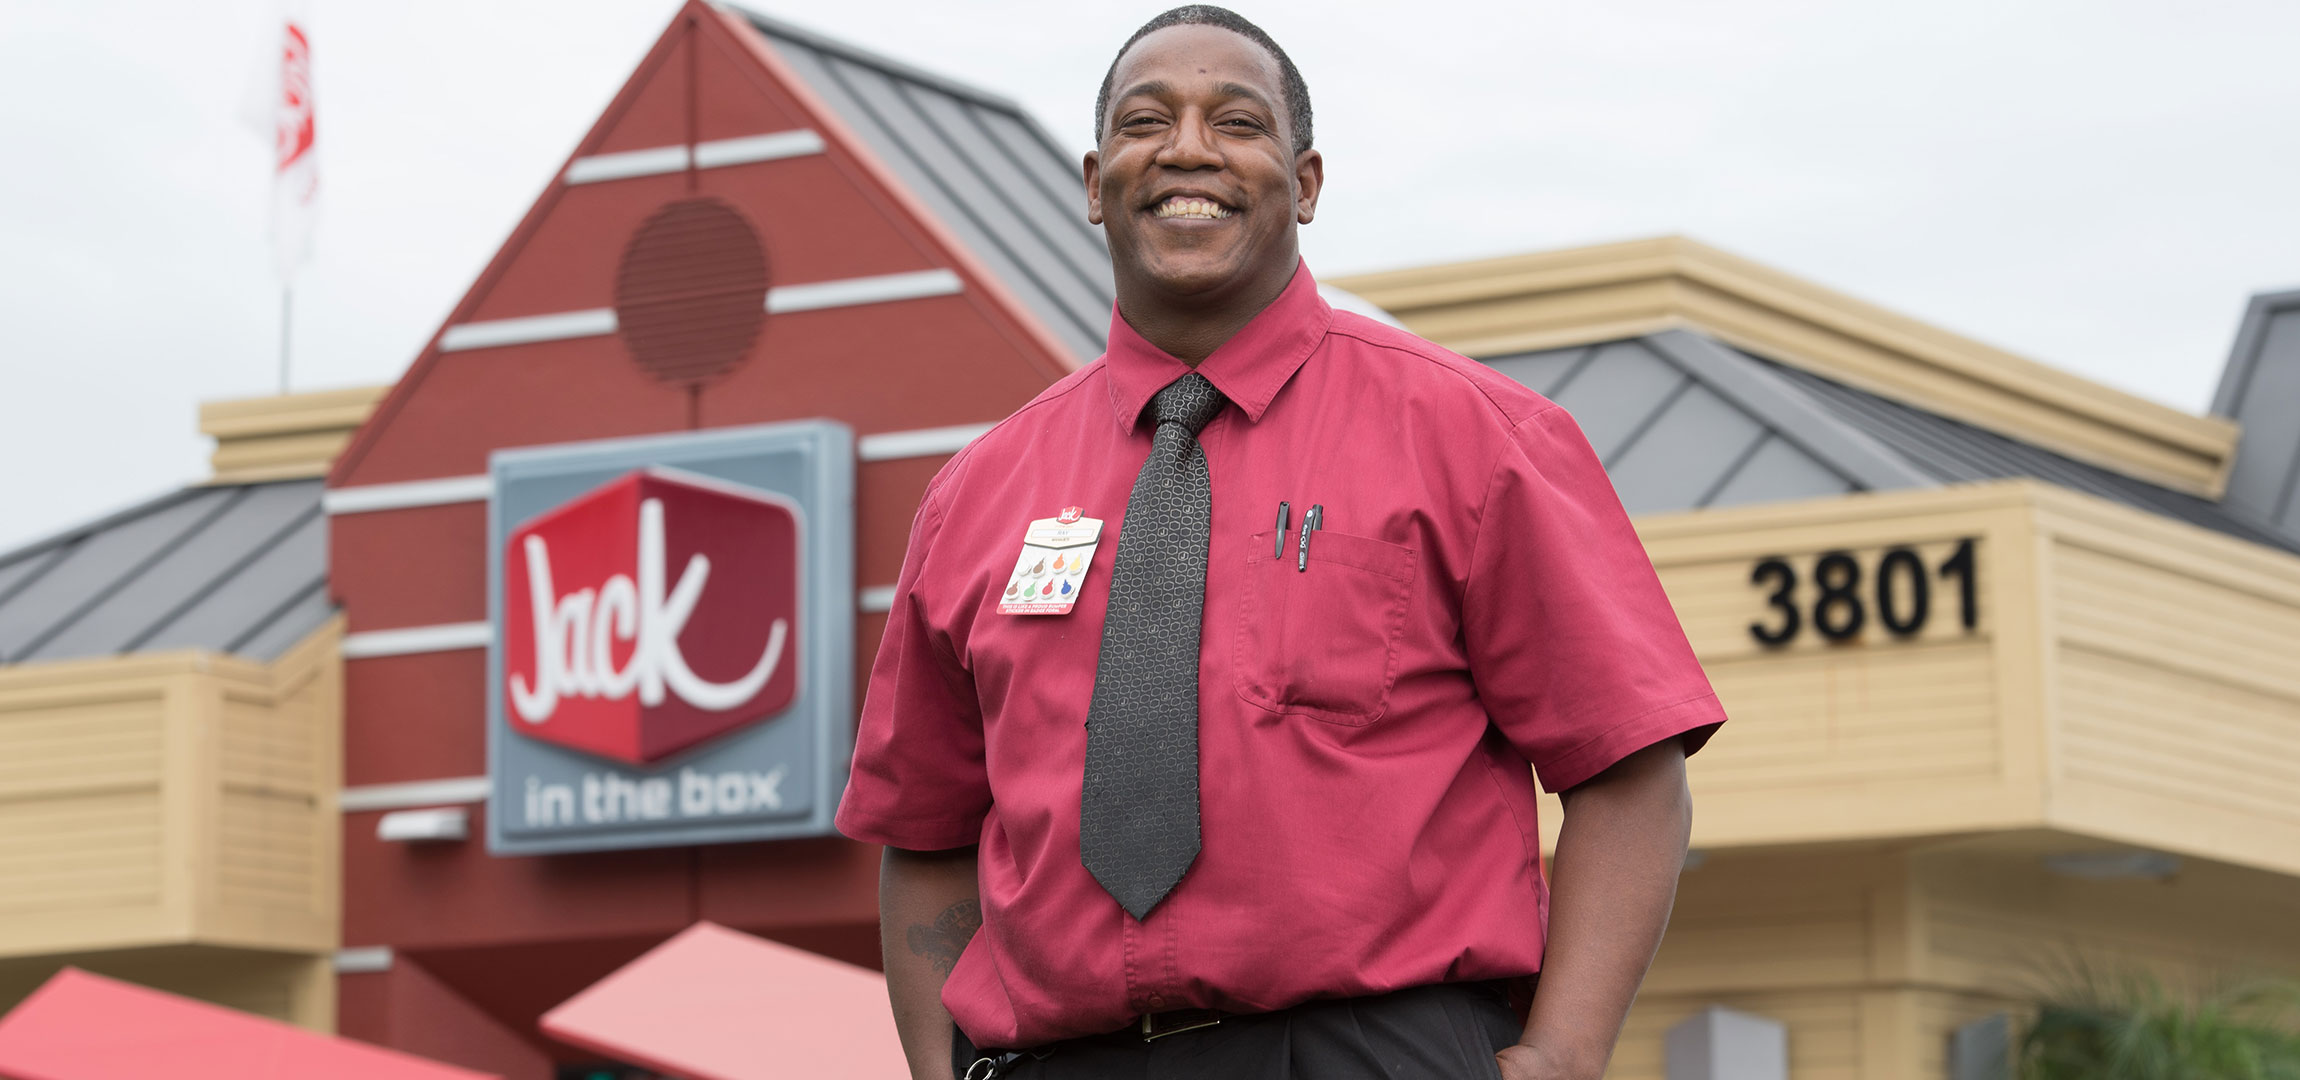 Jack in the Box Management